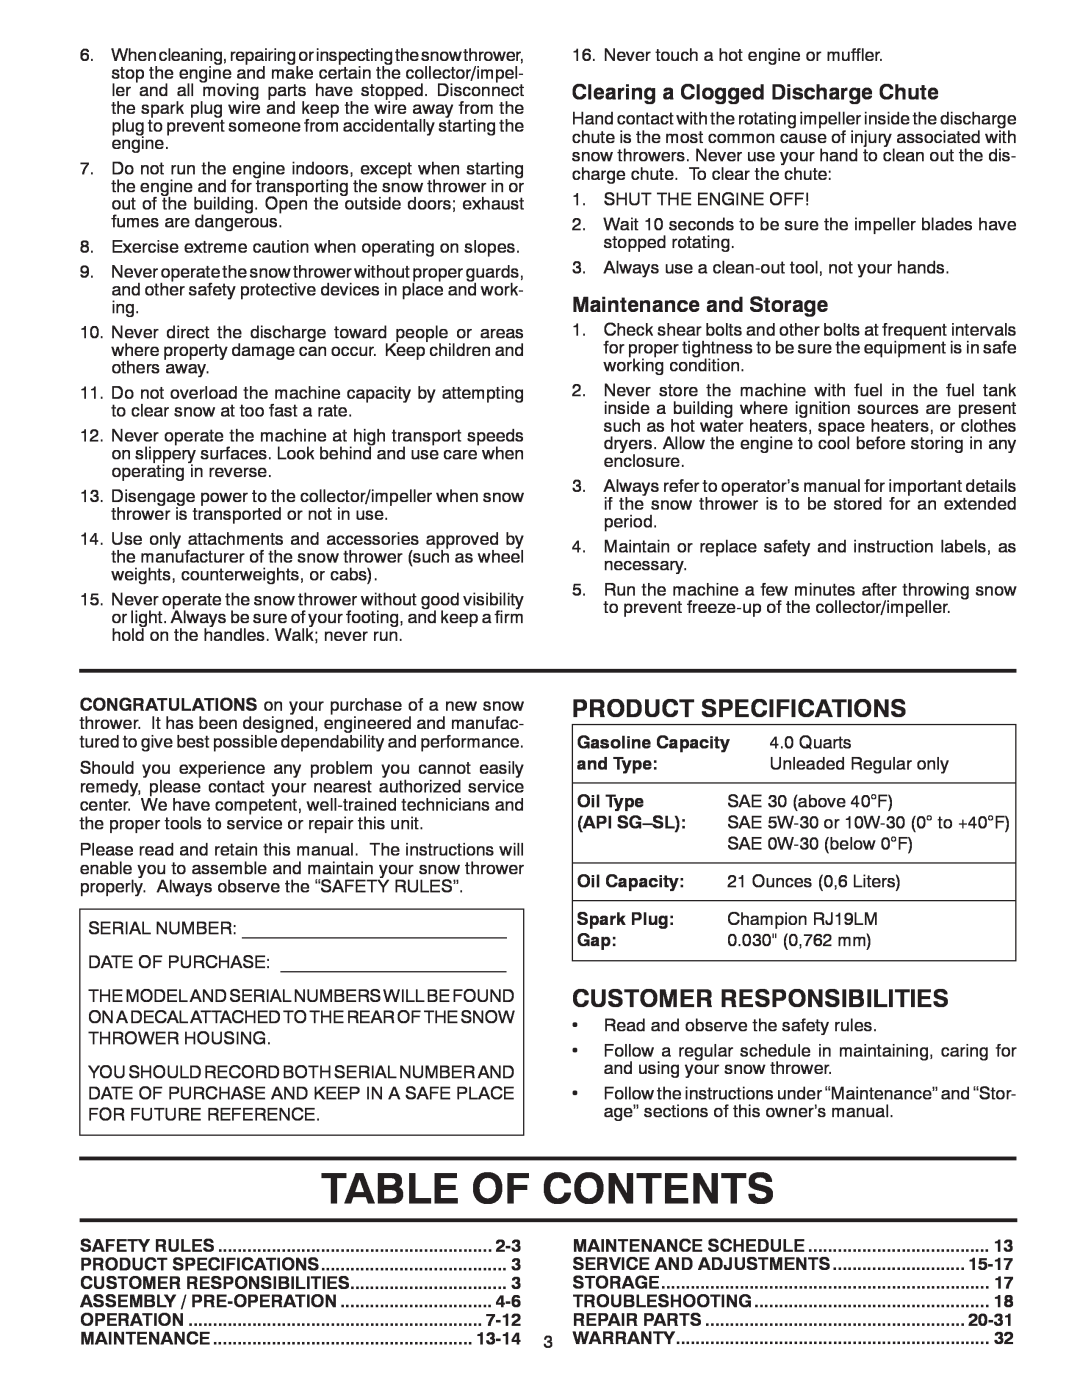 Poulan 96192001800 Table Of Contents, Product Specifications, Customer Responsibilities, Maintenance and Storage, and Type 